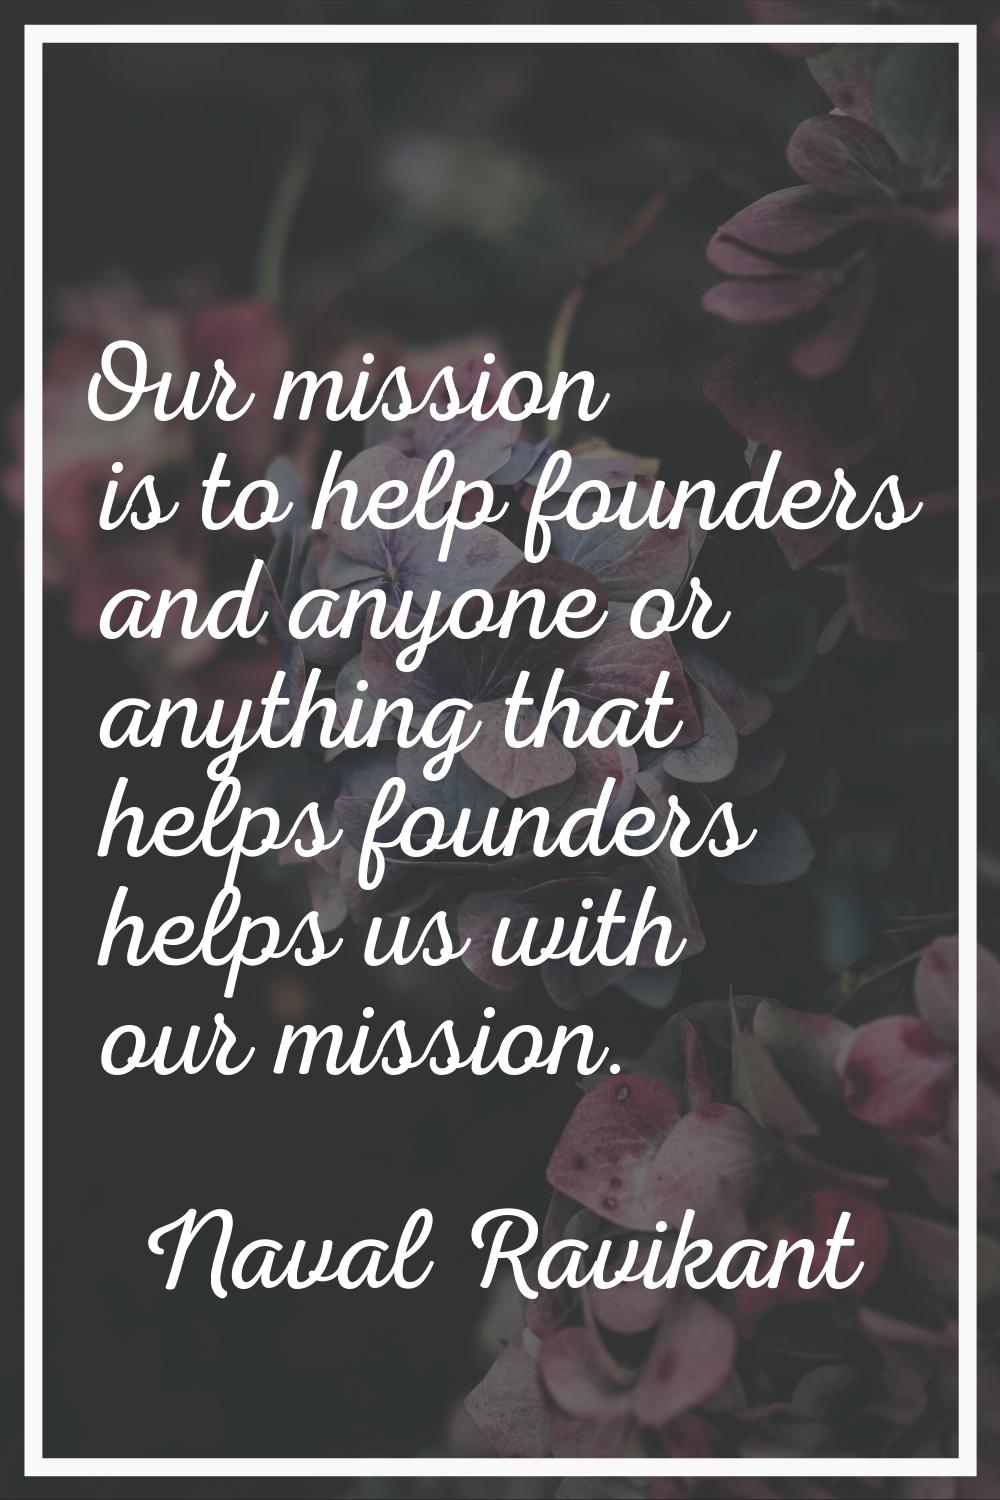 Our mission is to help founders and anyone or anything that helps founders helps us with our missio